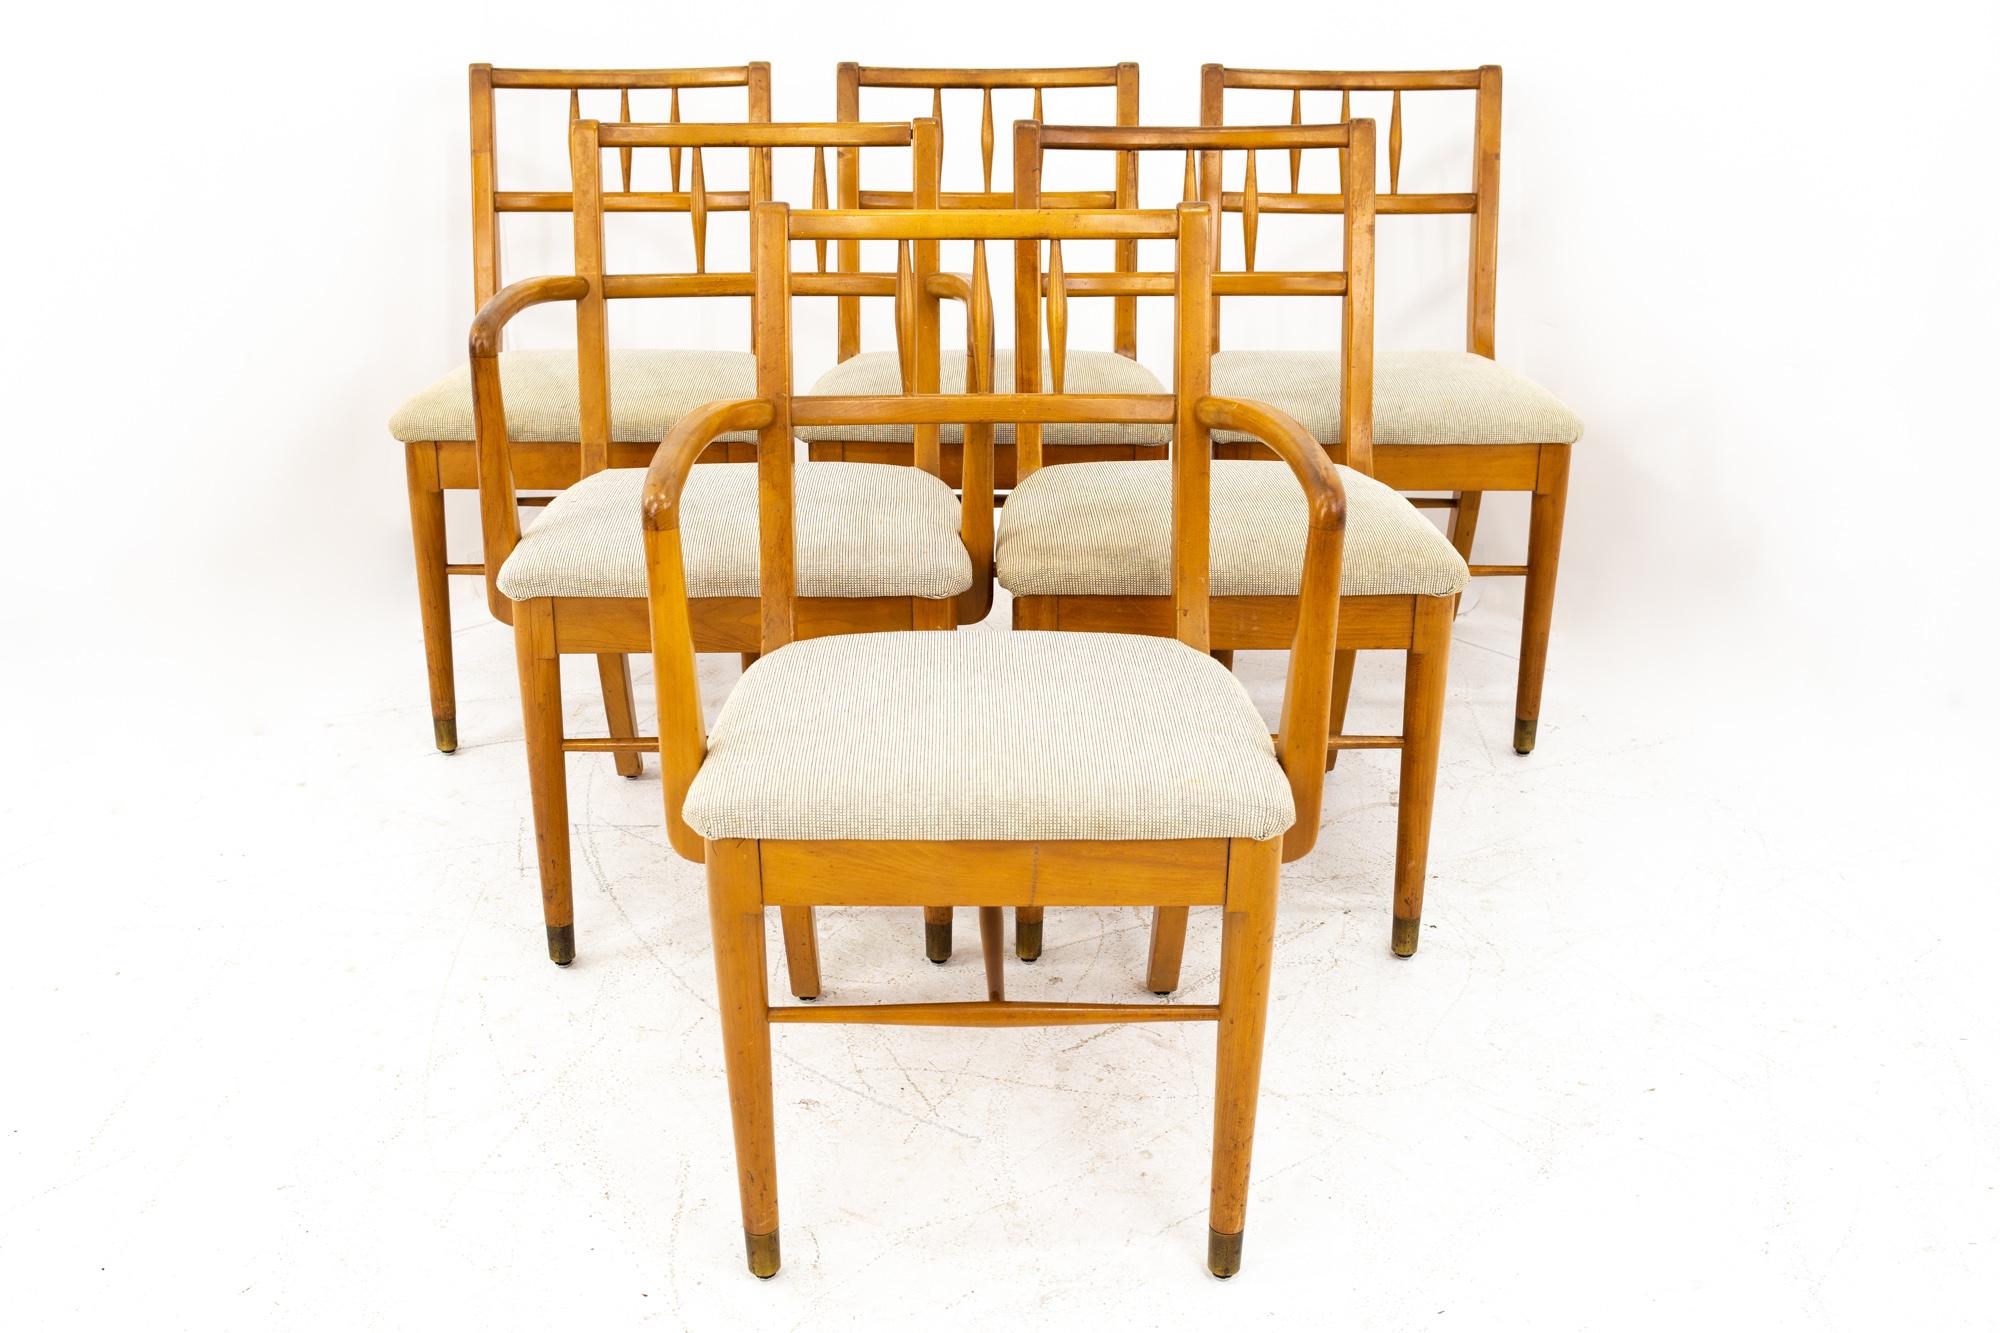 Milo Baughman for Drexel todays living midcentury blonde dining chairs, set of 6
Chairs with arms measure: 19.5 wide x 19 deep x 27 high, with a seat height of 18 inches
Armless chairs measures: 19.5 wide x 19 deep x 31 high, with a seat height of